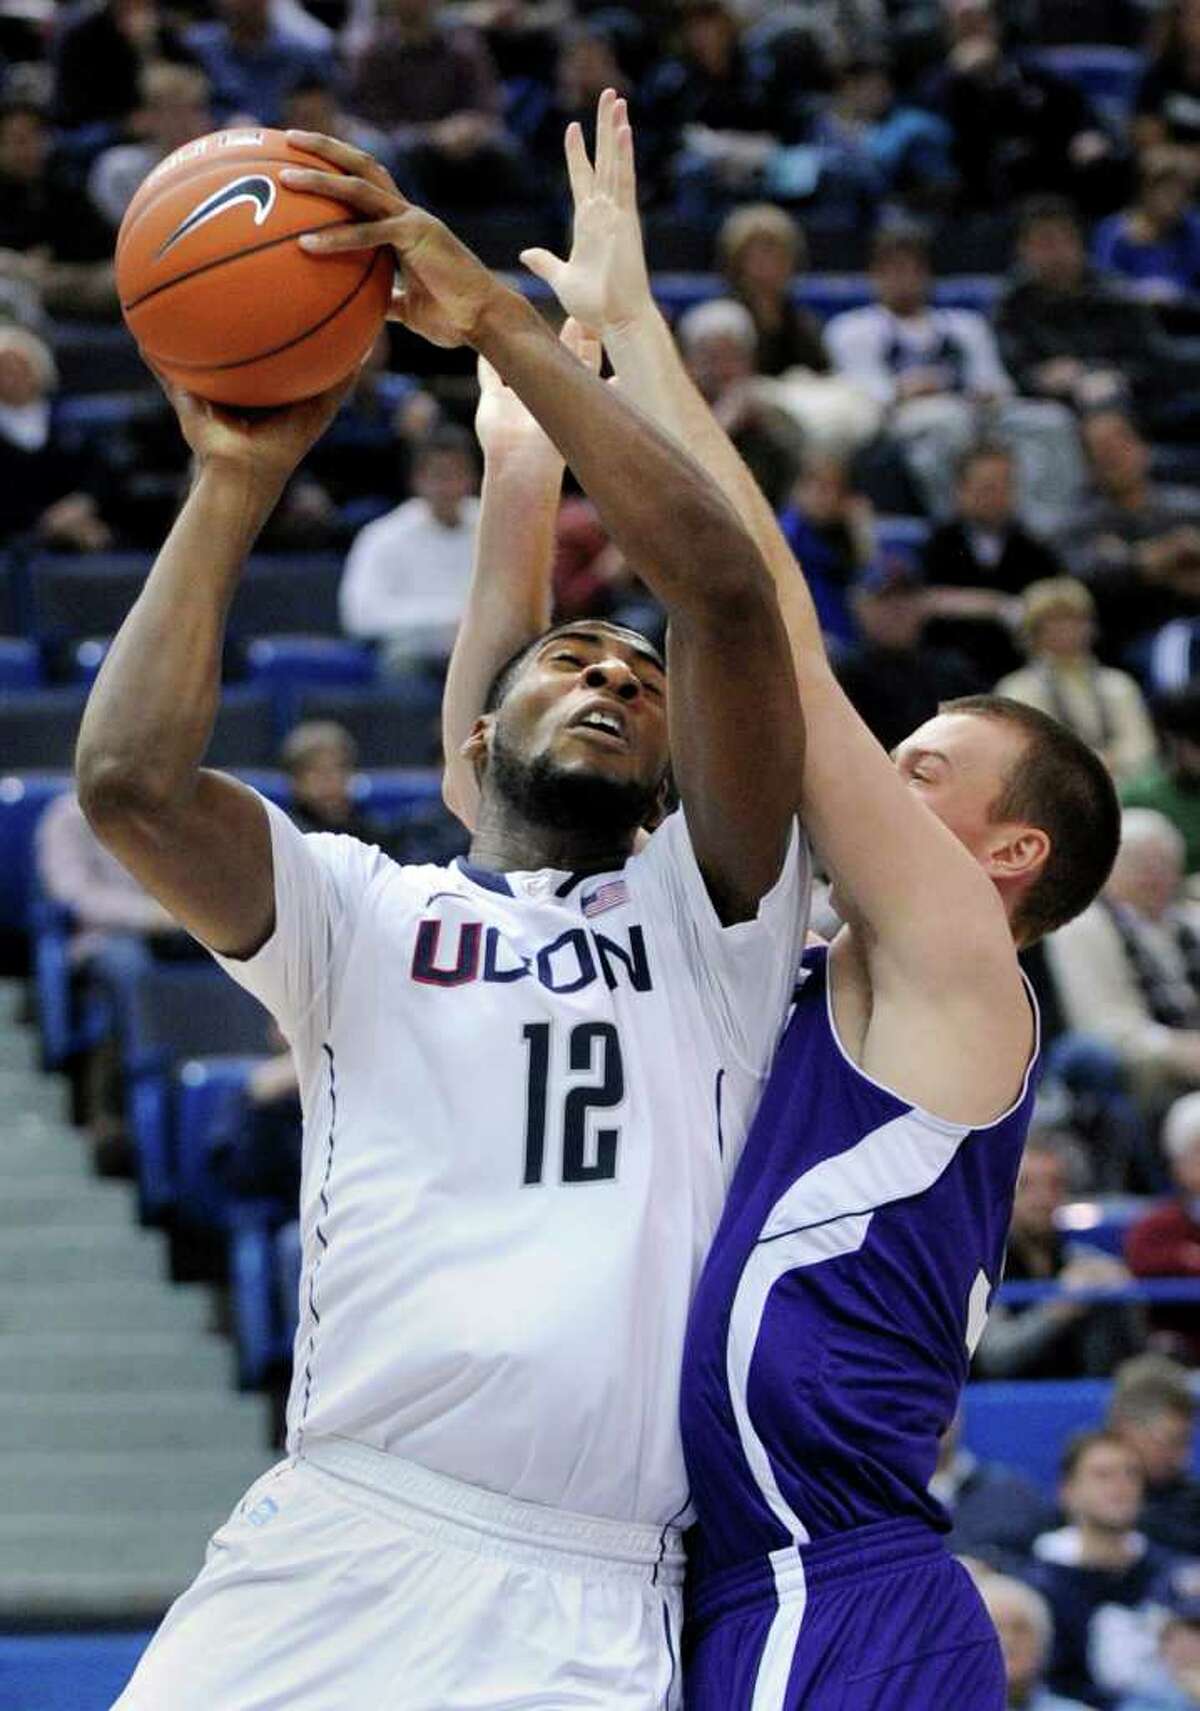 Connecticut's Andre Drummond (12) is fouled by Holy Cross' Jordan Stevens during the second half of an NCAA college basketball game in Hartford, Conn., on Sunday, Dec. 18, 2011. Drummond scored a game-high 24 points in his team's 77-40 victory. (AP Photo/Fred Beckham)